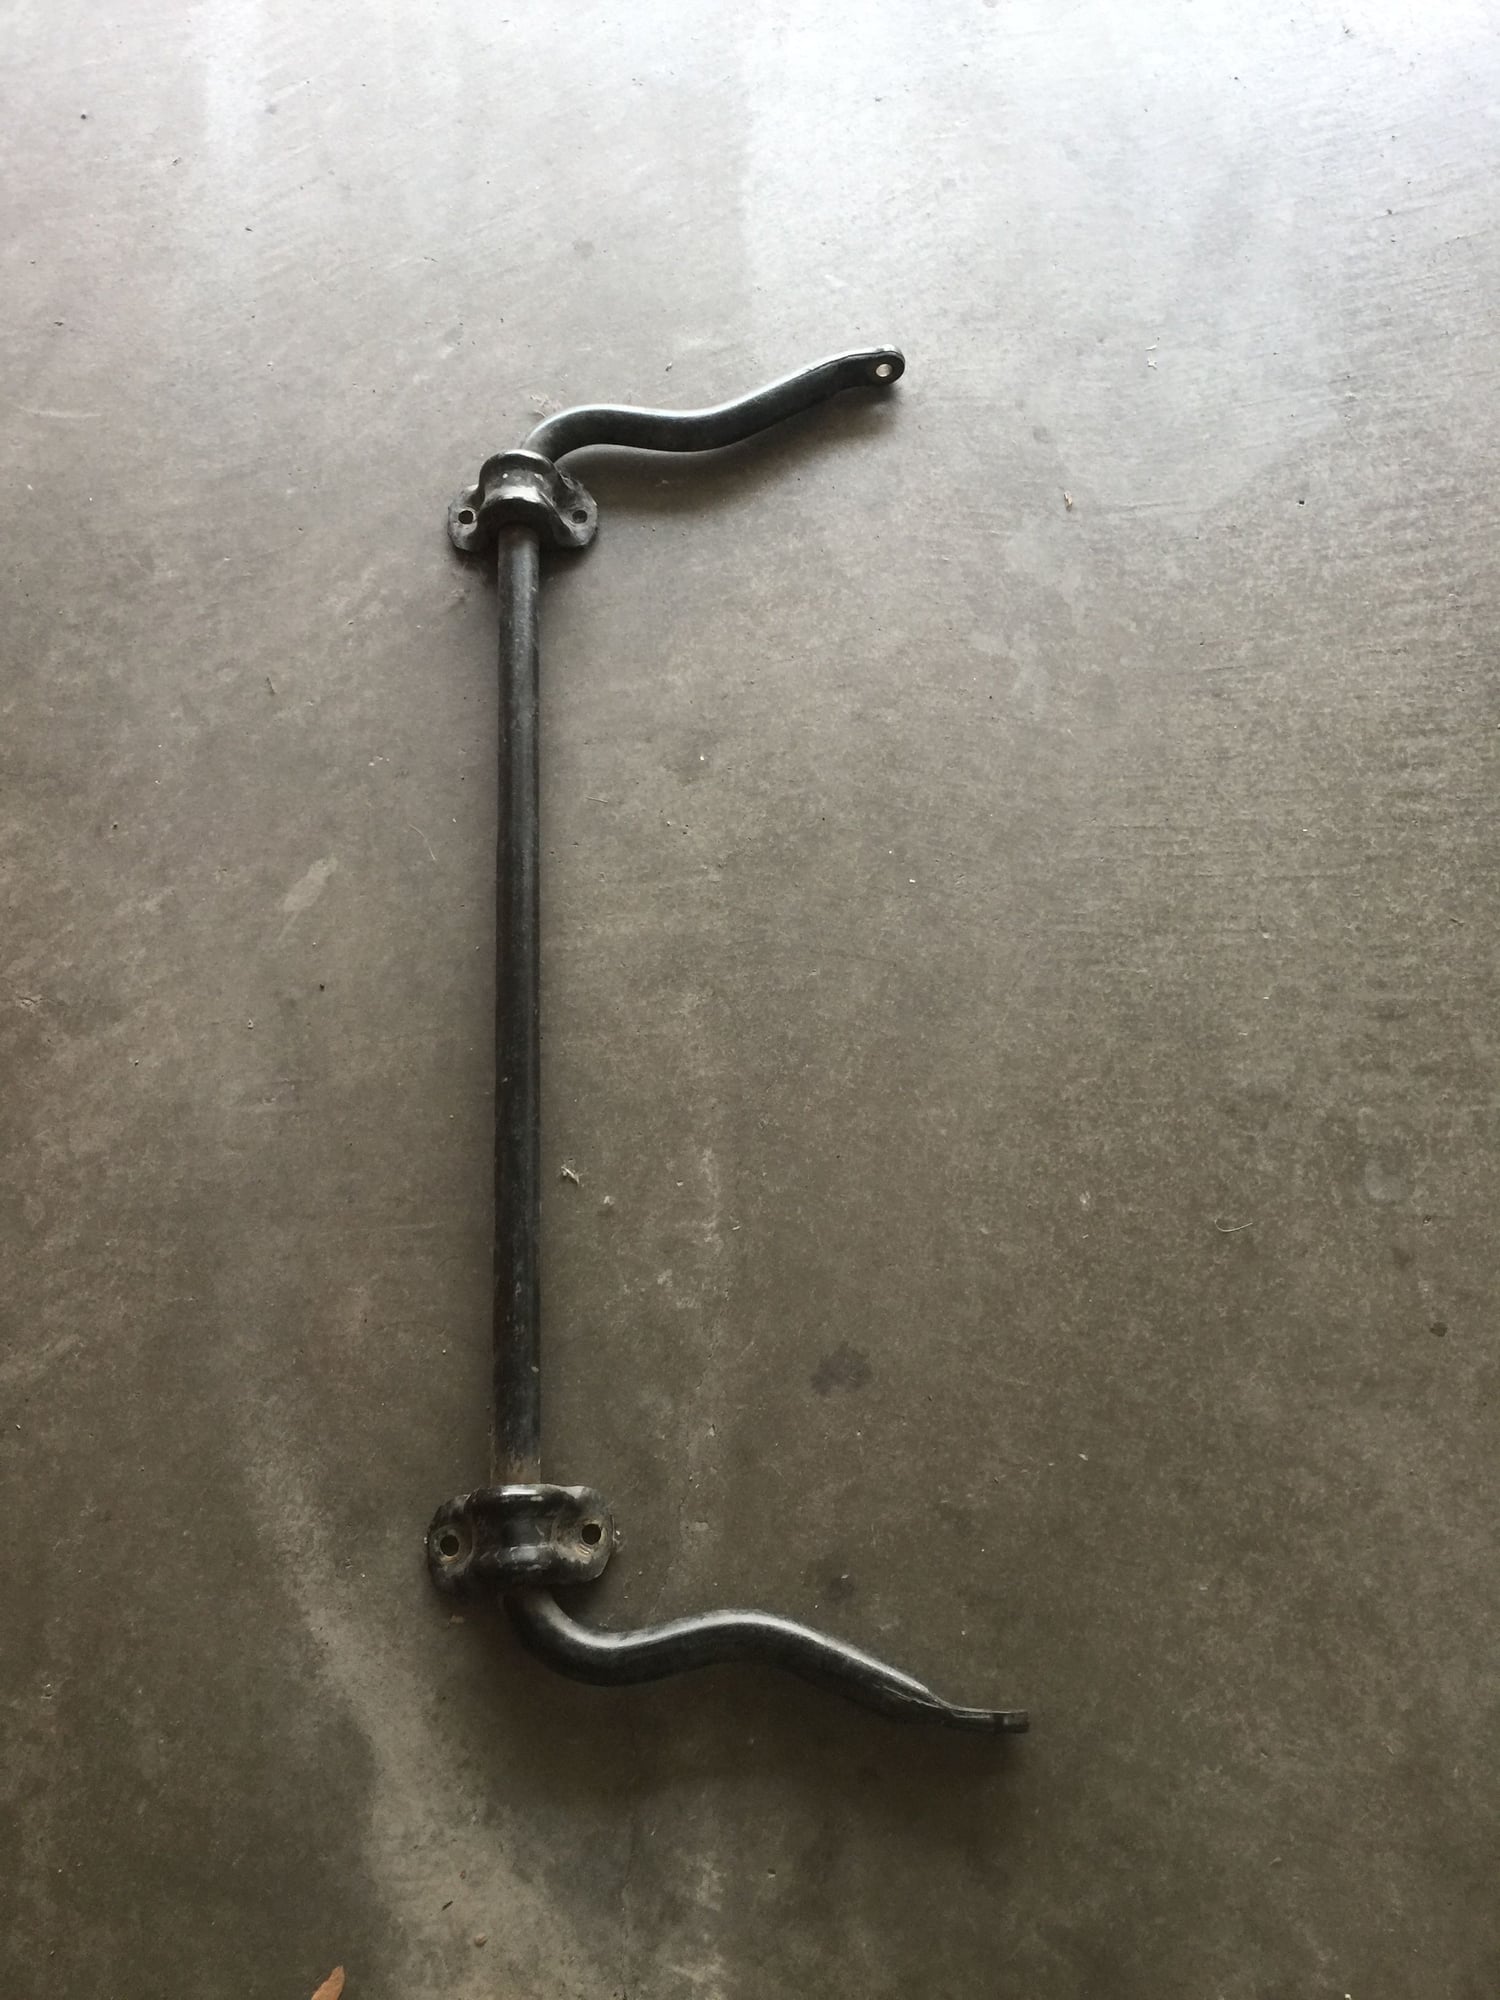 Steering/Suspension - Factory Front JK Sway Bar $25 - Used - 2007 to 2018 Jeep Wrangler - Lake Forest, CA 92630, United States